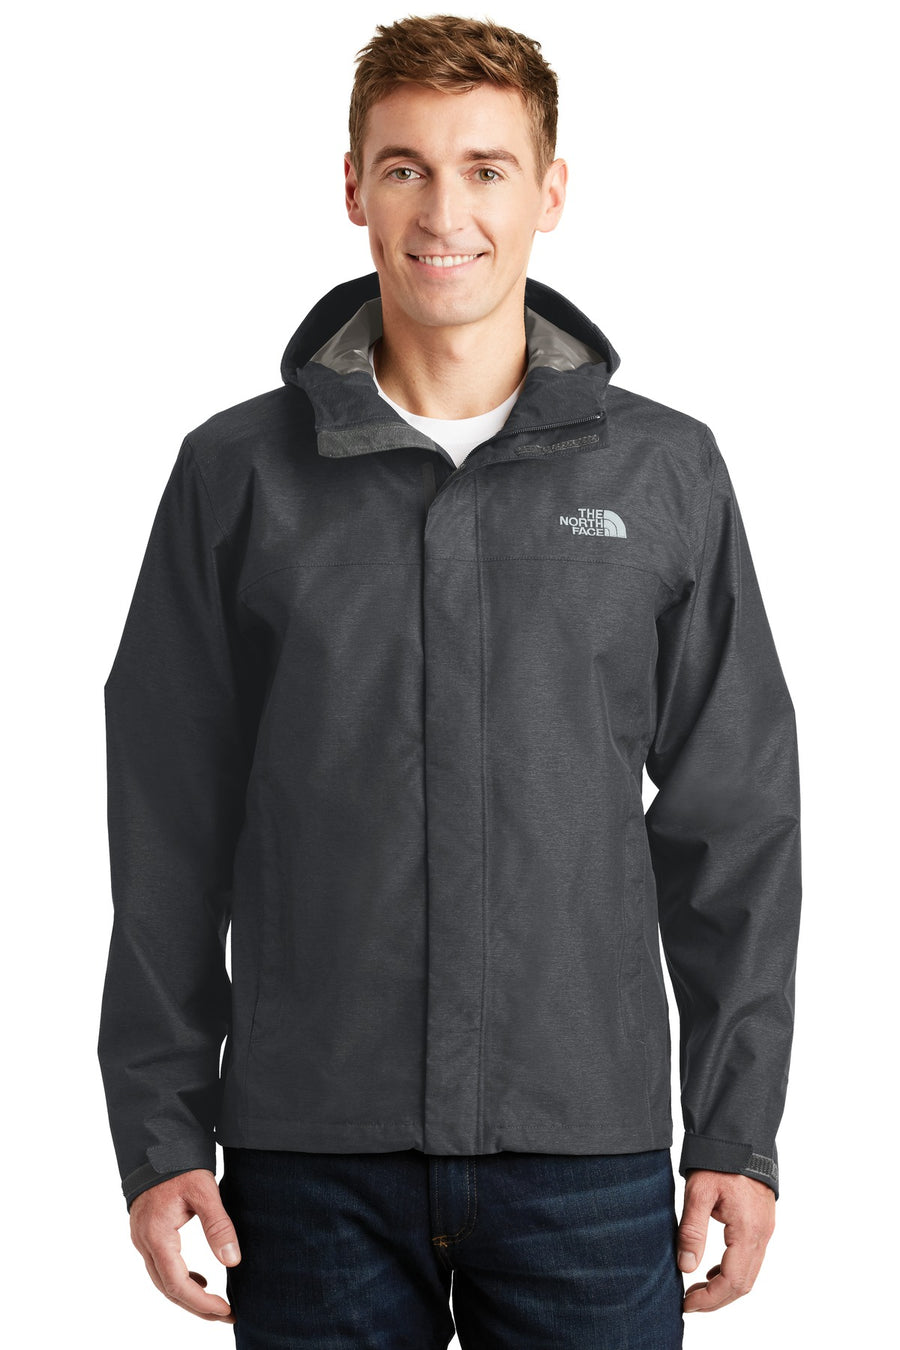 The North Face DryVent Rain Jacket.